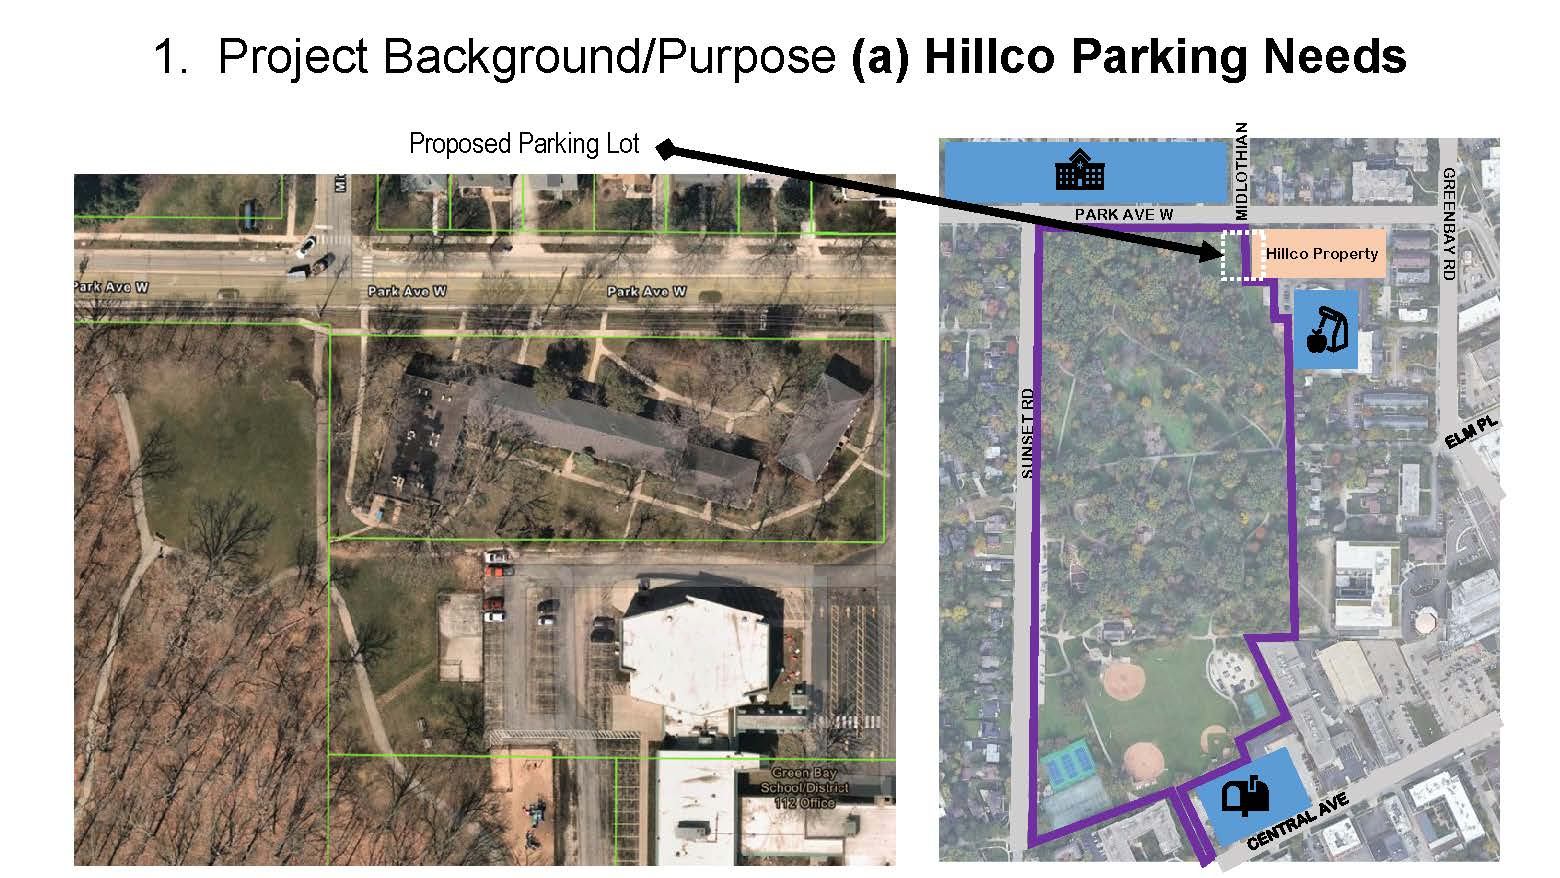 Project Background/Purpose: (a) Hillco Parking Needs